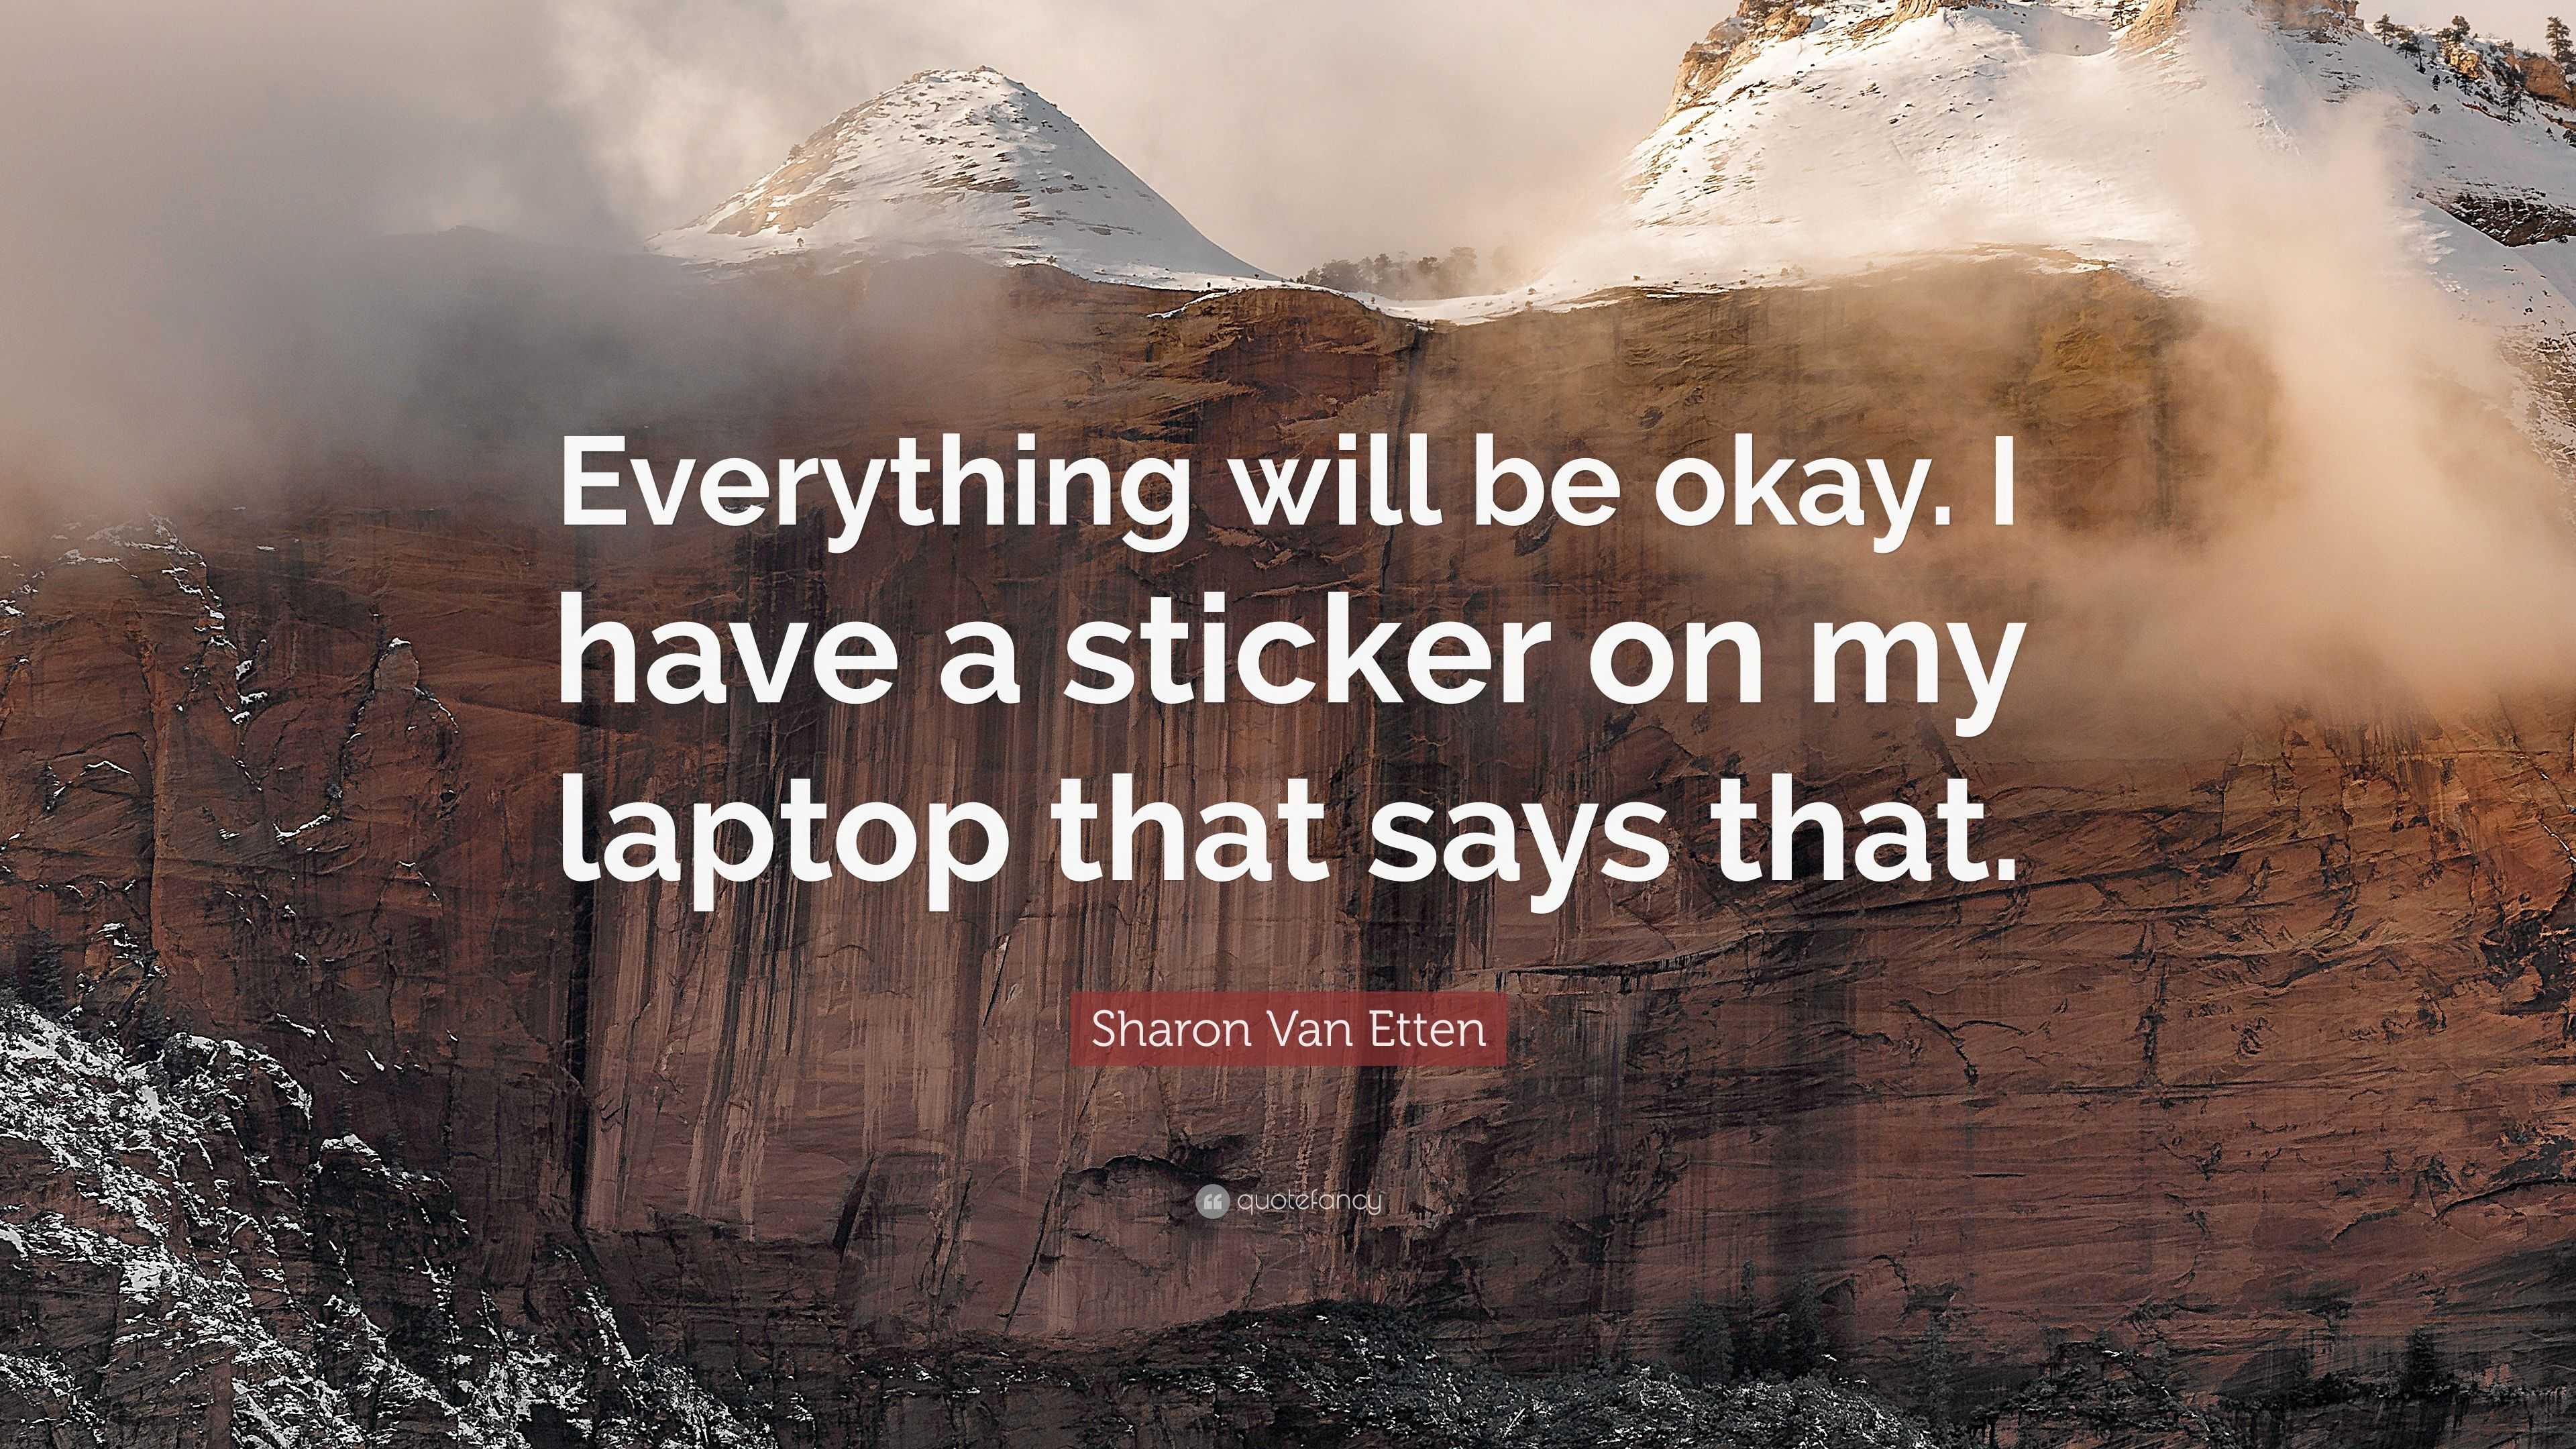 Sharon Van Etten Quote: “Everything will be okay. I have a sticker on my  laptop that